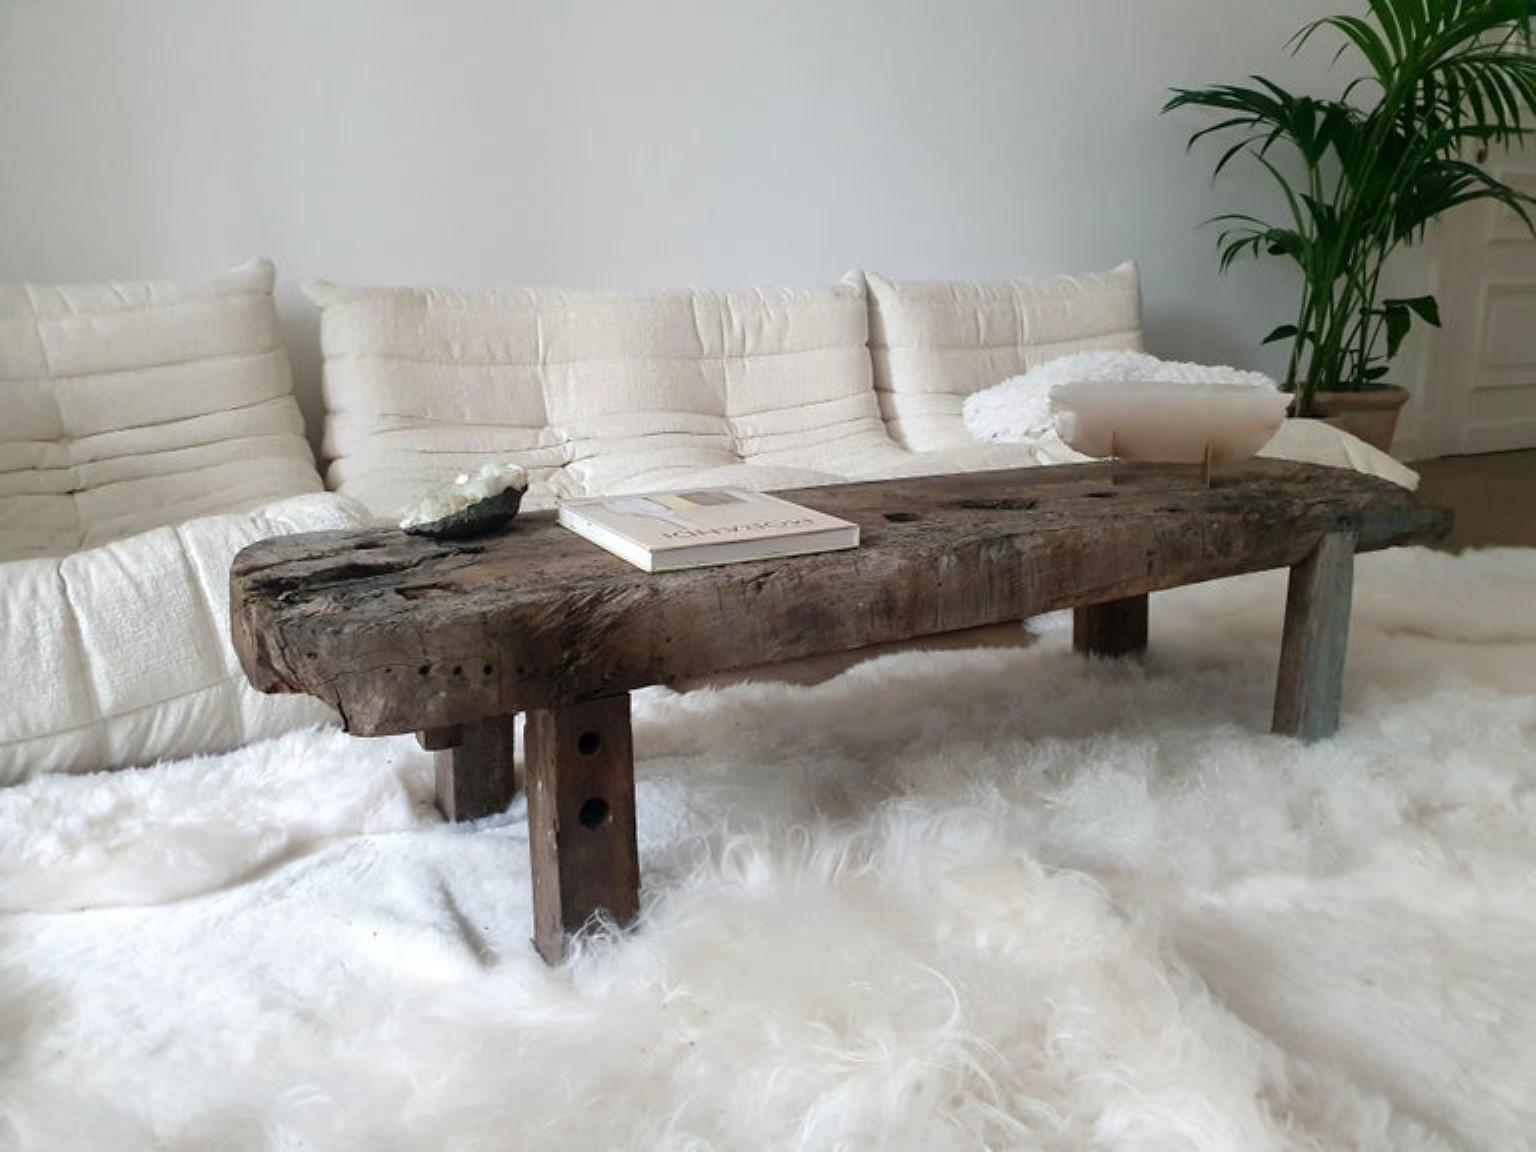 An antique Wabi Sabi style as defined by Axel Vervoordt and Leonard Koren.
This unique table as an organic look and rustic aesthetic. This rare item blends perfectly in a natural interior in order to create a zen aesthetic.
It's made of solid